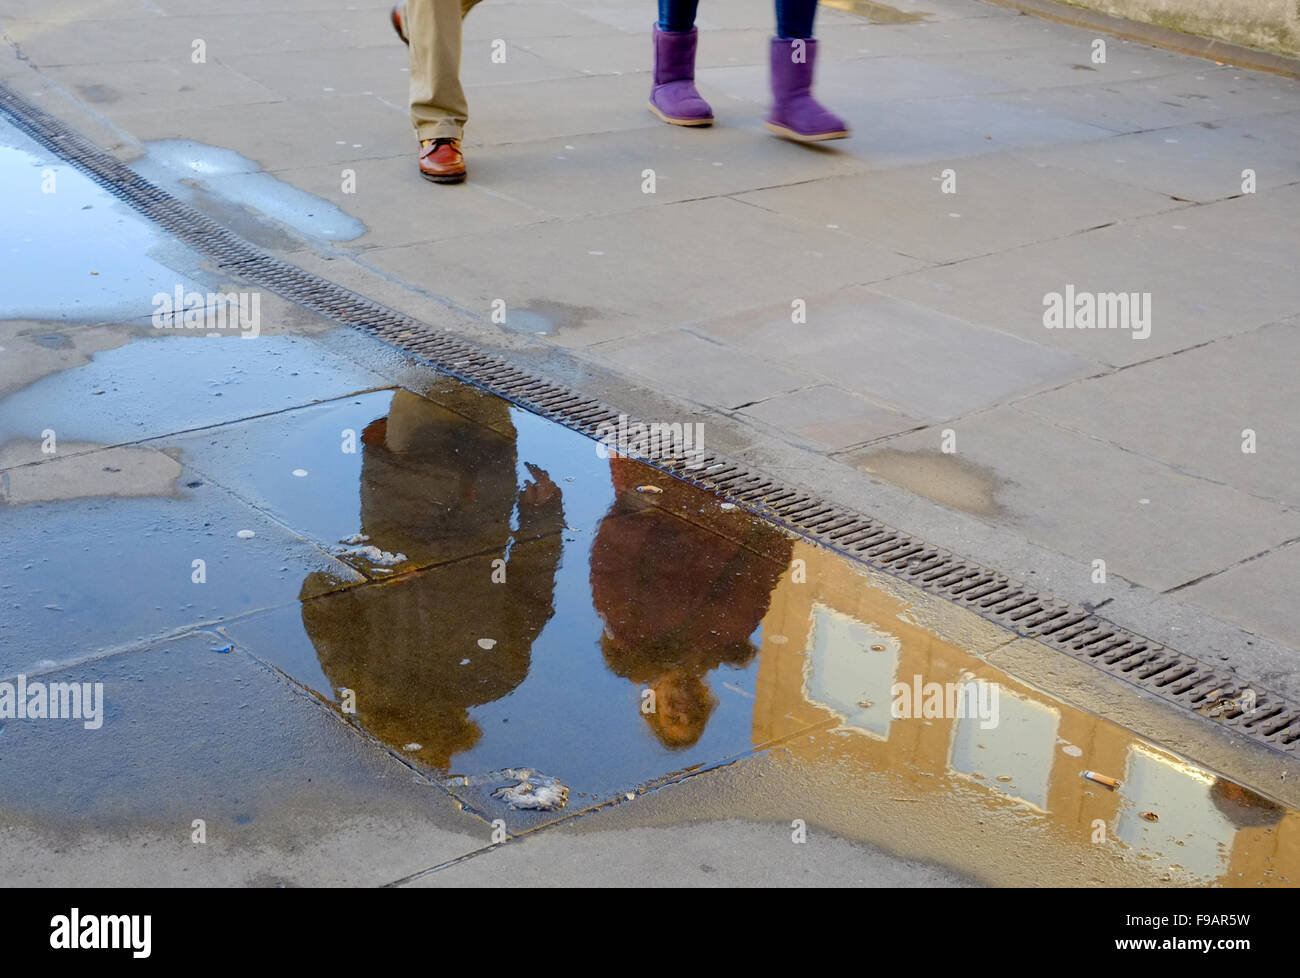 Street photography in London - reflection on the street Stock Photo